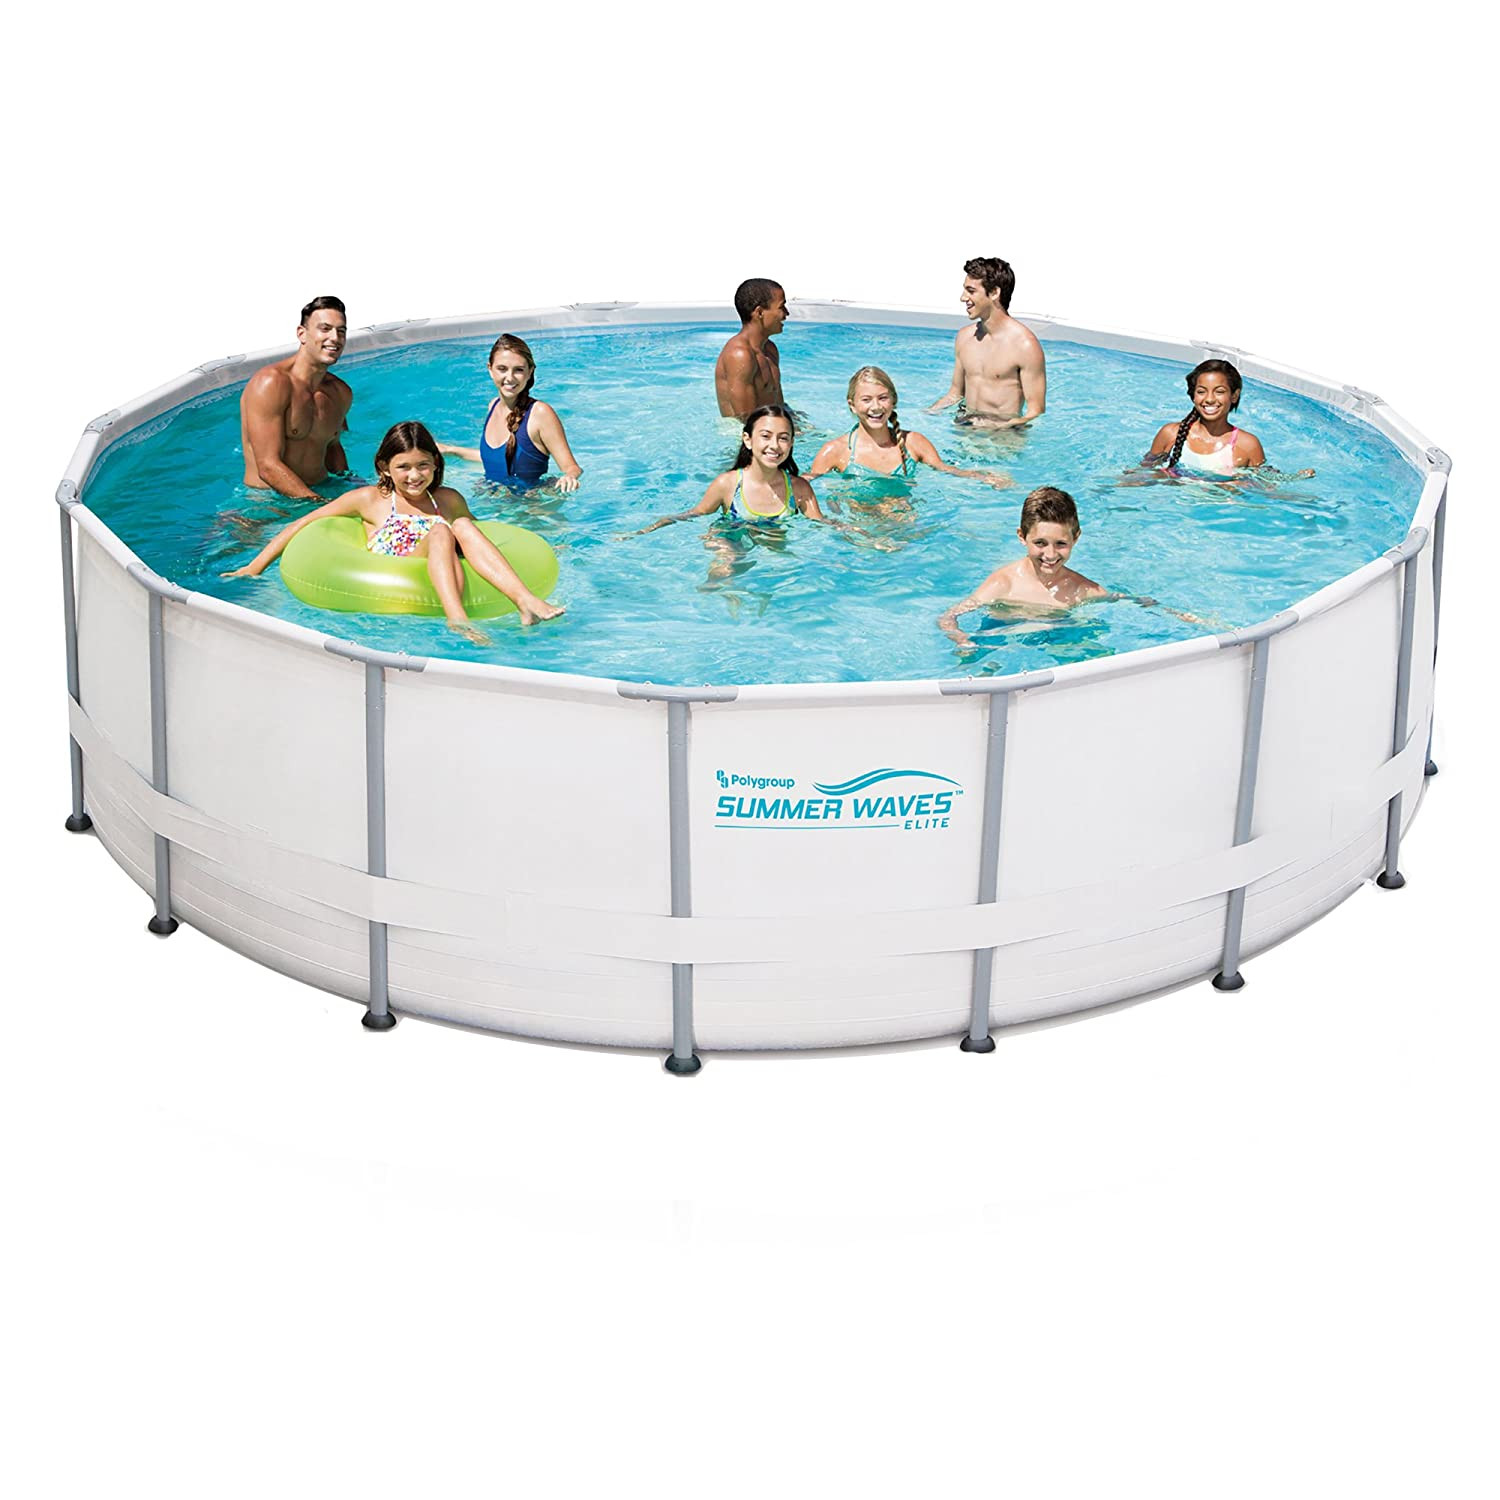 4 Ft Above Ground Pool
 7 Best Ground Pools Under $600 Reviews